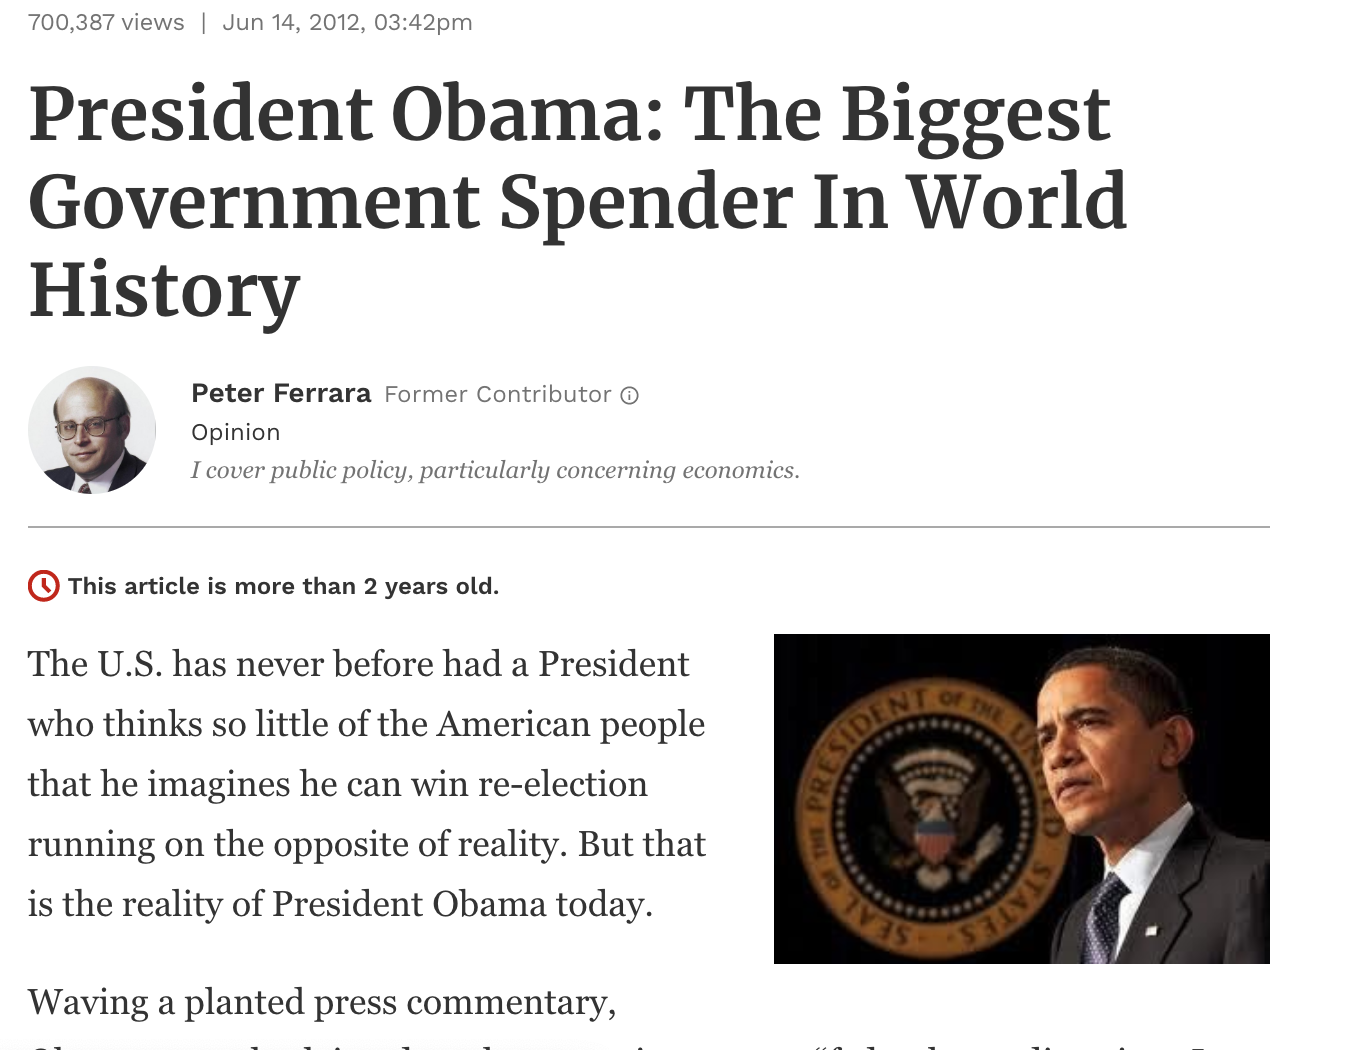 https://www.forbes.com/sites/peterferrara/2012/06/14/president-obama-the-biggest-government-spender-in-world-history/#63f747611084